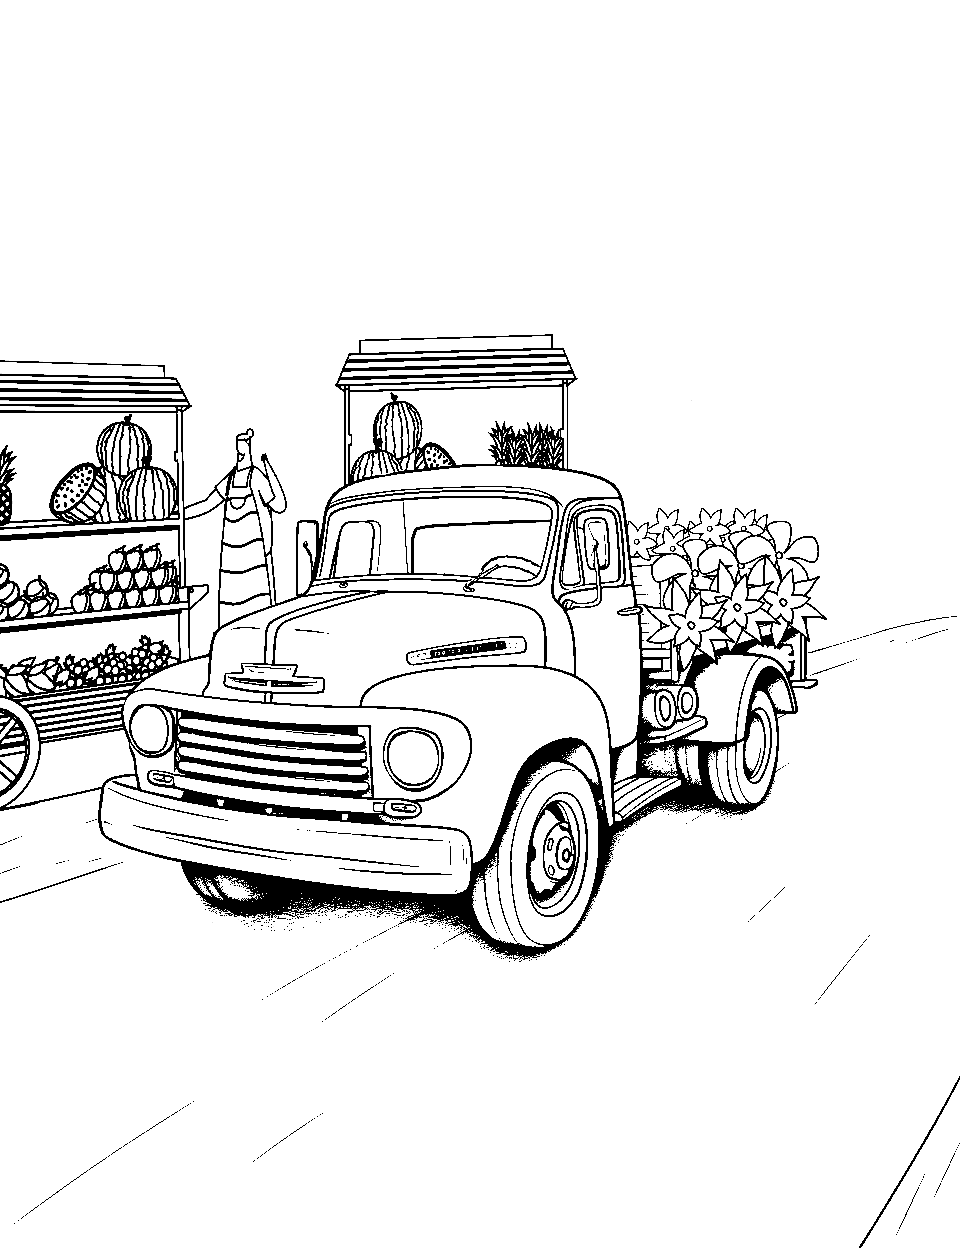 Lively Market Day Coloring Page - A truck filled with flowers parked in a farmers’ market.